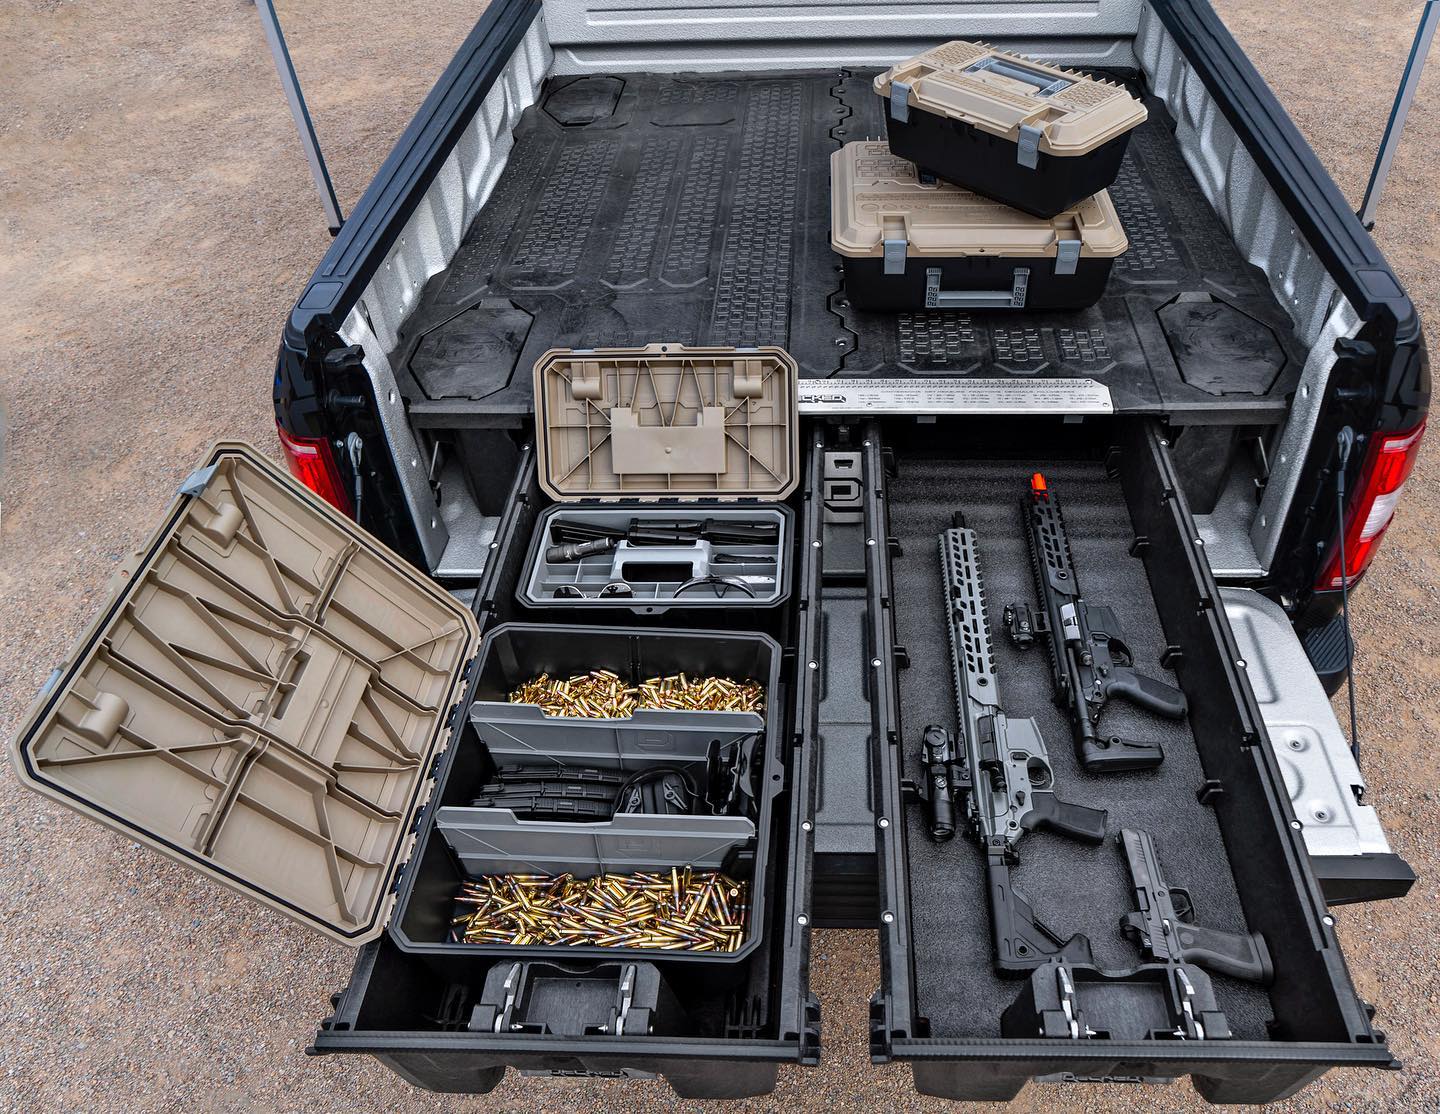 Legally Secure and Store Your Firearms for Transport in Your Pickup Truck